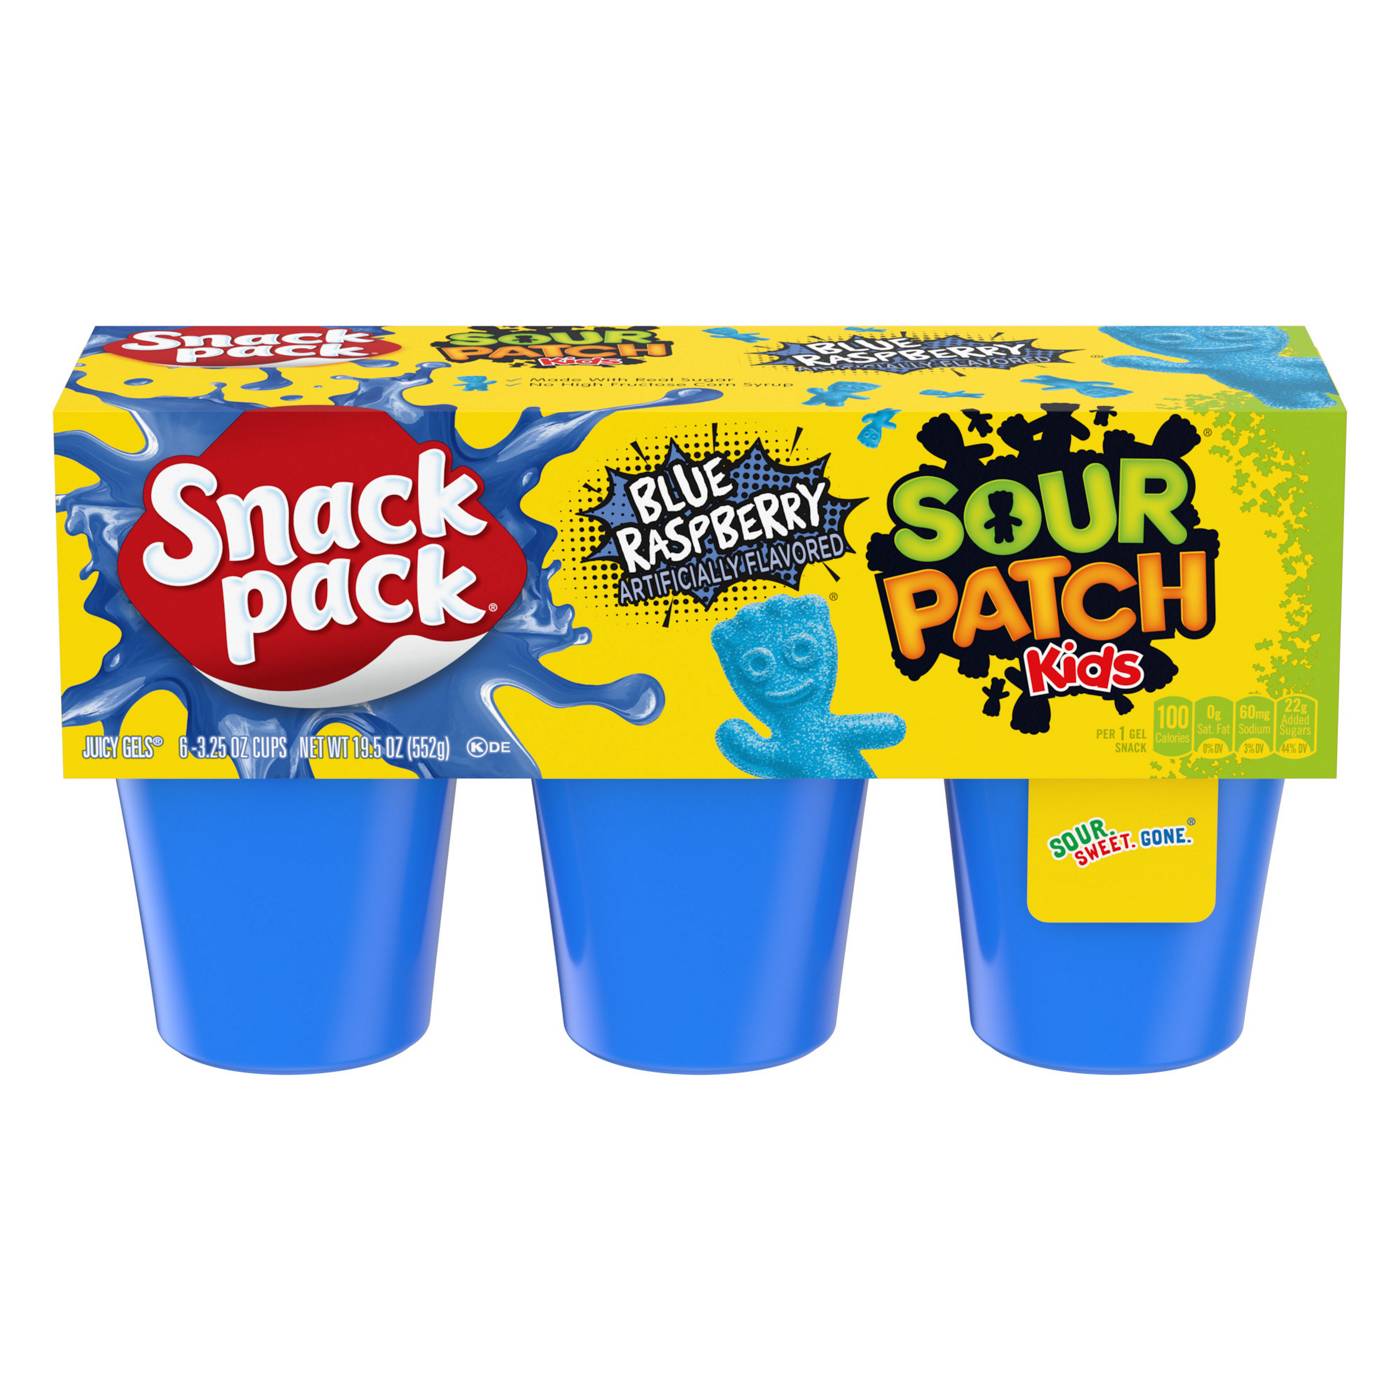 Snack Pack Sour Patch Kids Blue Raspberry Juicy Gels Cups; image 1 of 4